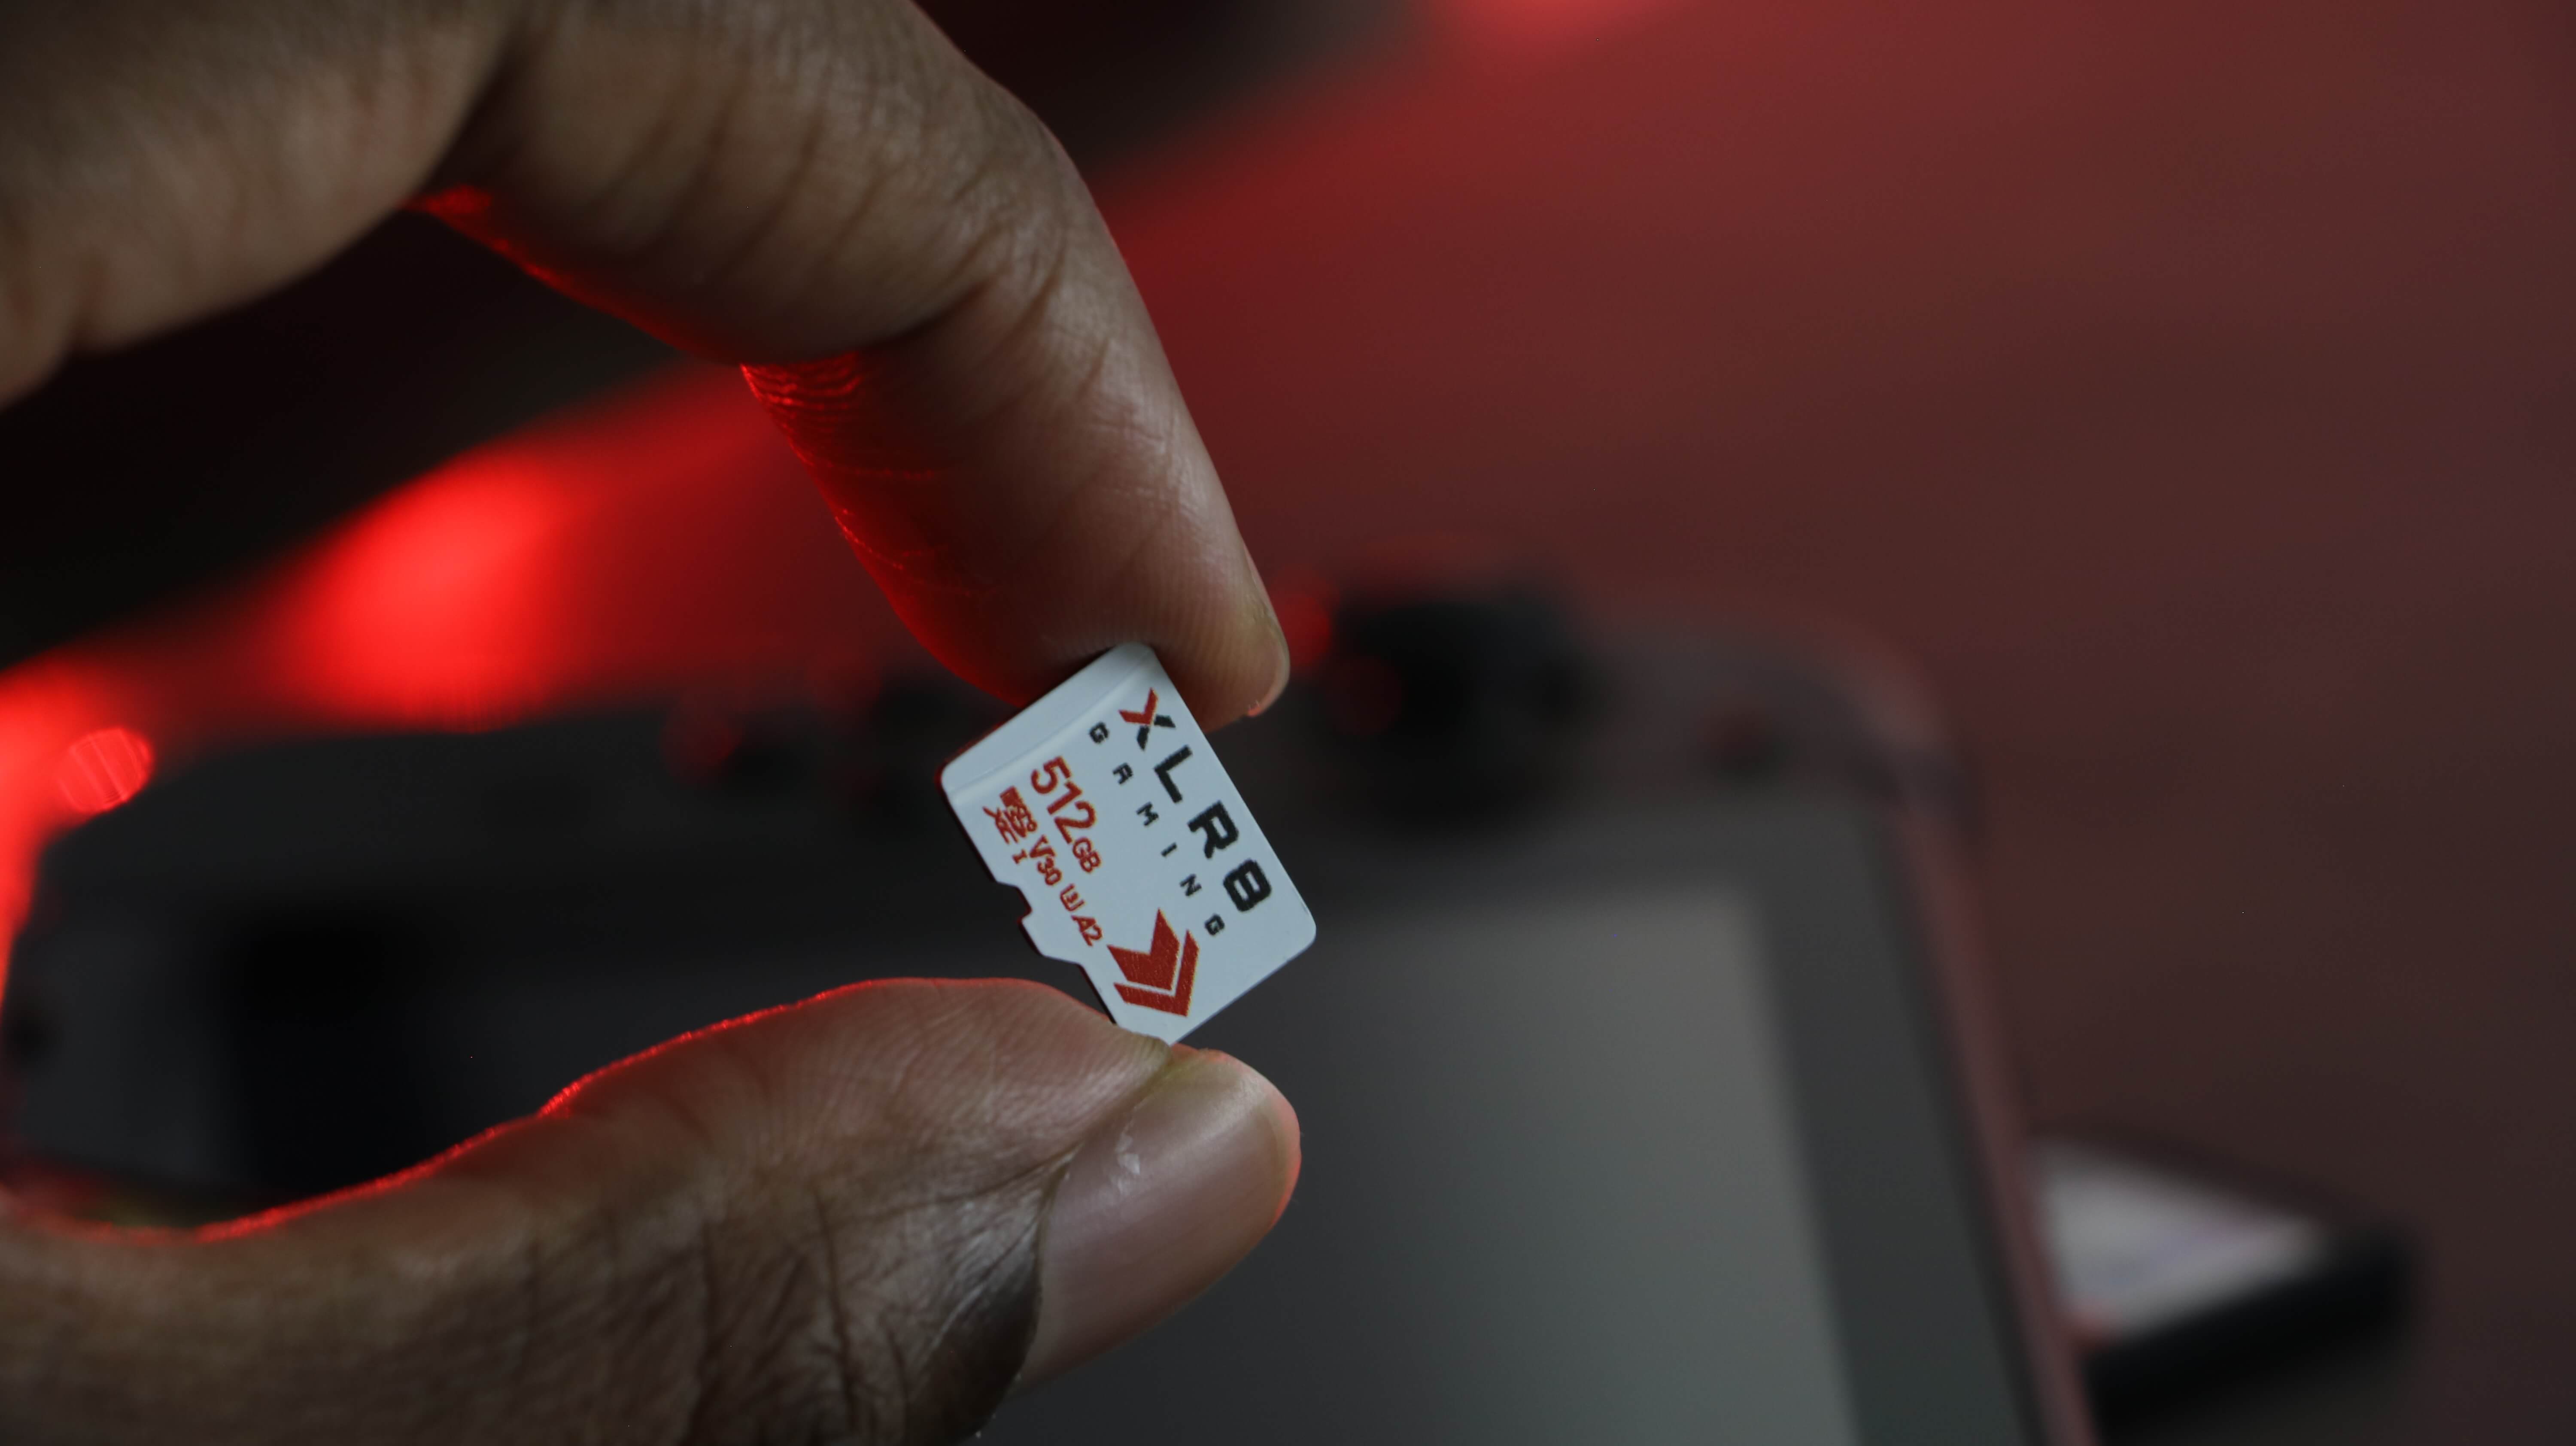 PNY introduces XLR8® gaming microSD flash memory cards for mobile devices and portable game consoles, PNY Technologies Quadro GmbH, press release